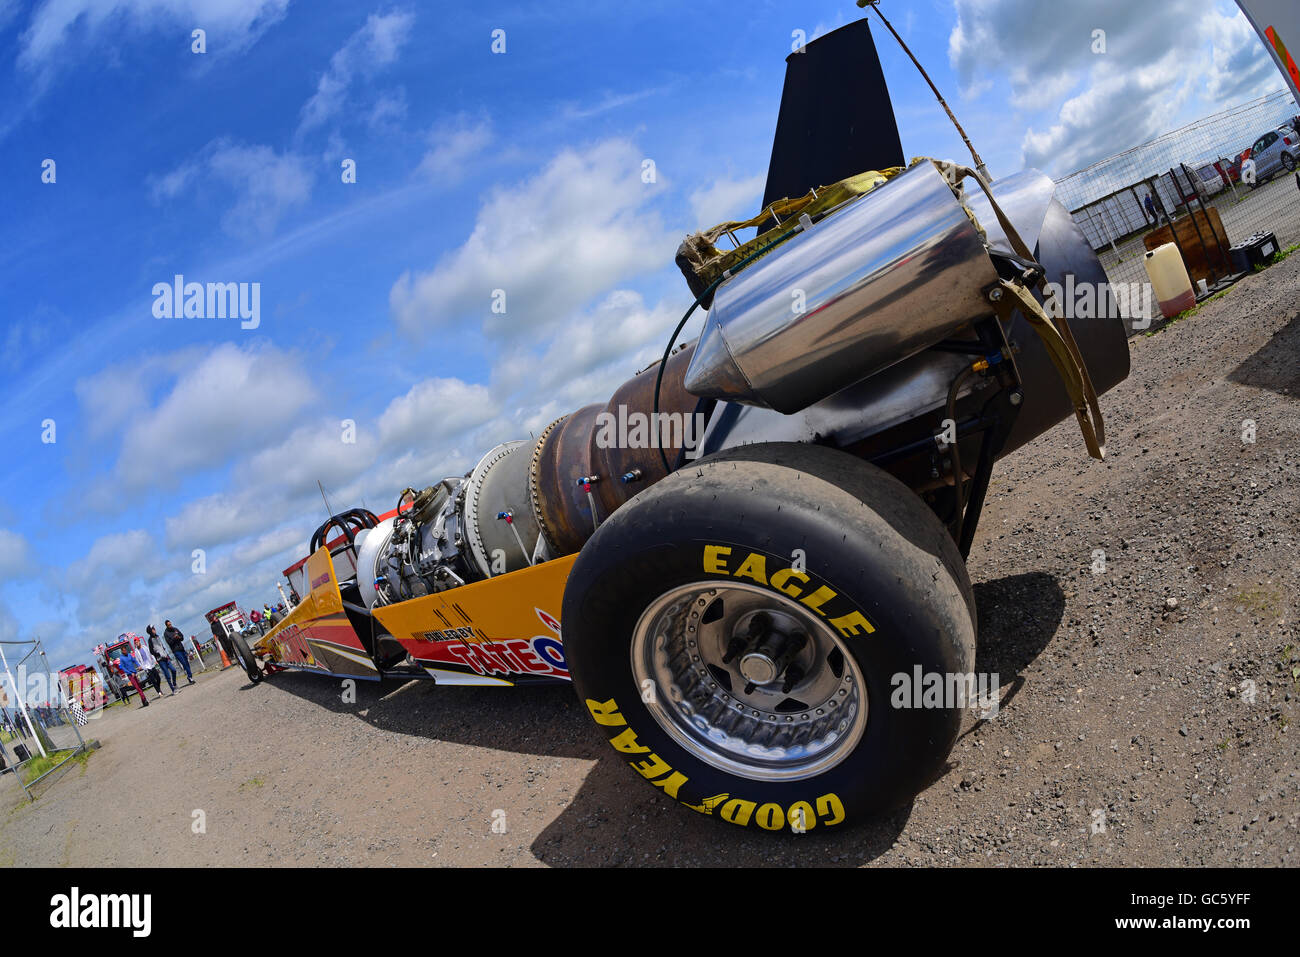 top fuel class dragster jet car at york dragway race track yorkshire united kingdom Stock Photo